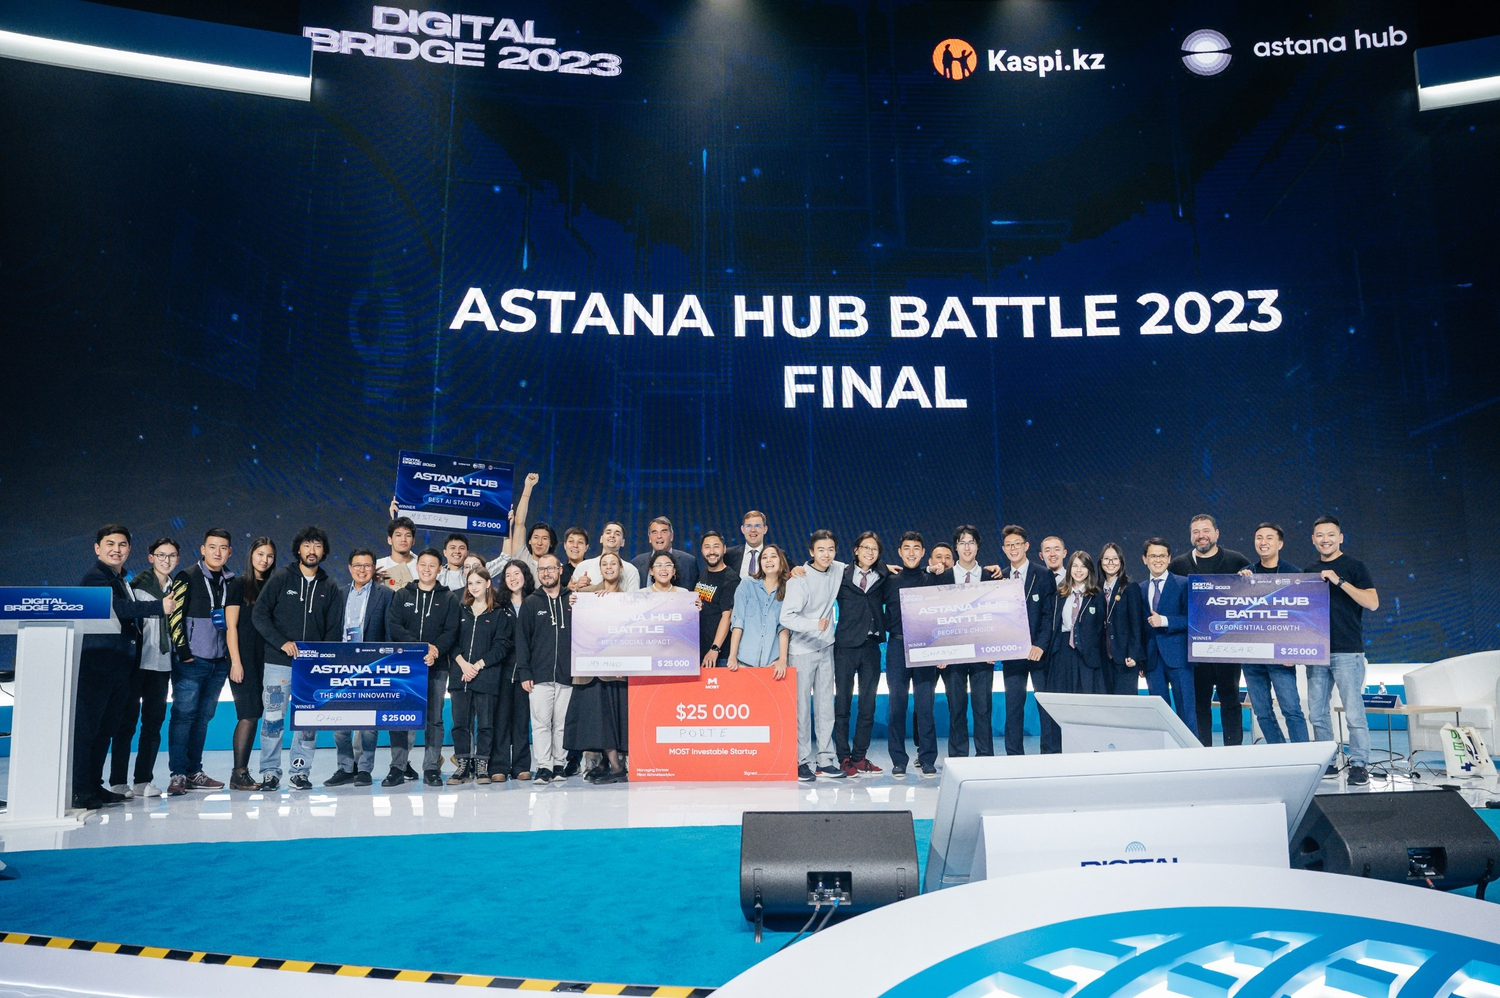 More than 200 startups from Central Eurasia competed at the Astana Hub Battle